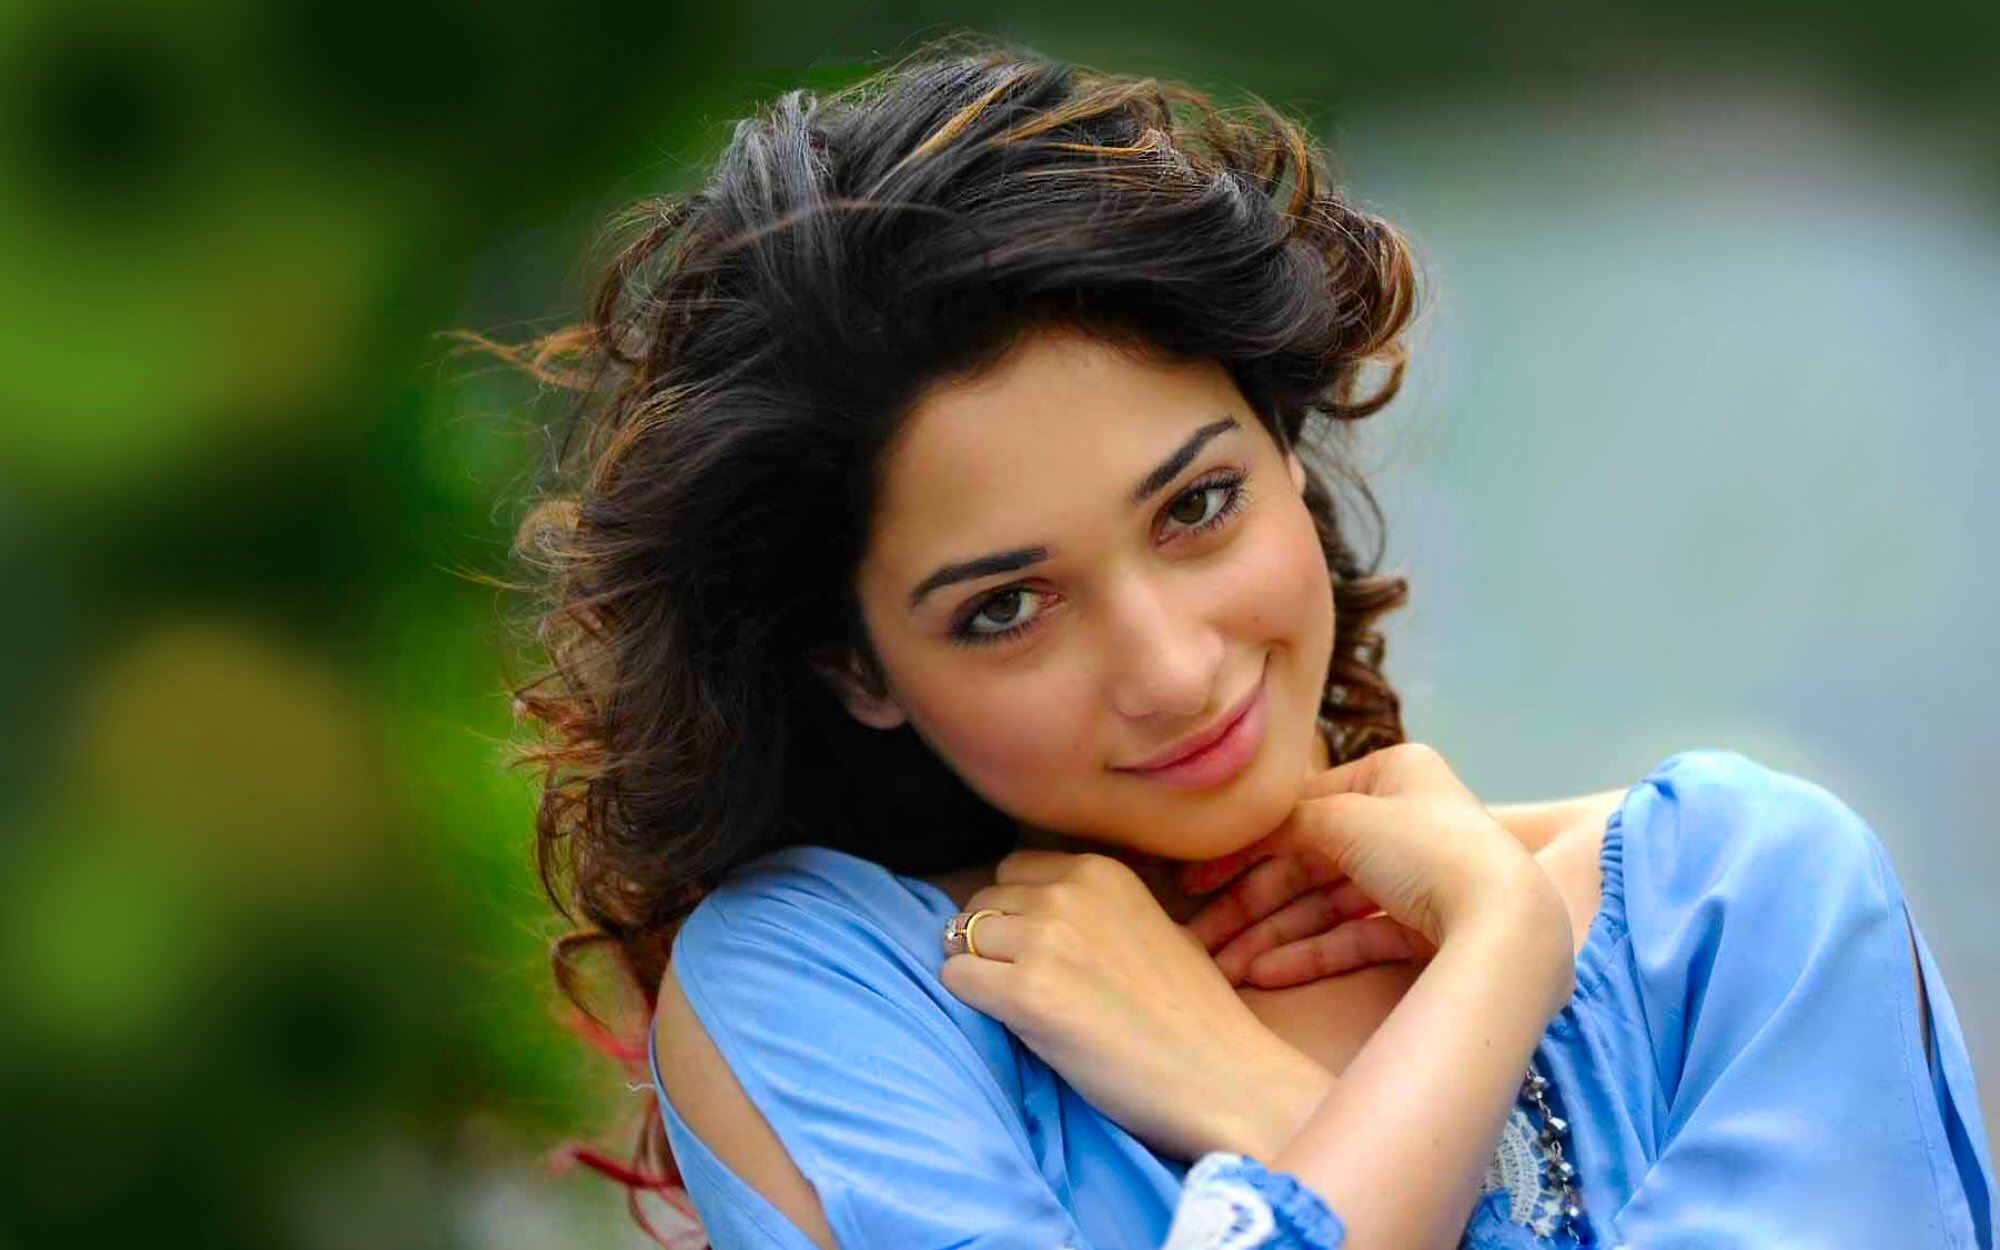 smile, actress, tamannaah bhatia, celebrity, bollywood, brunette images